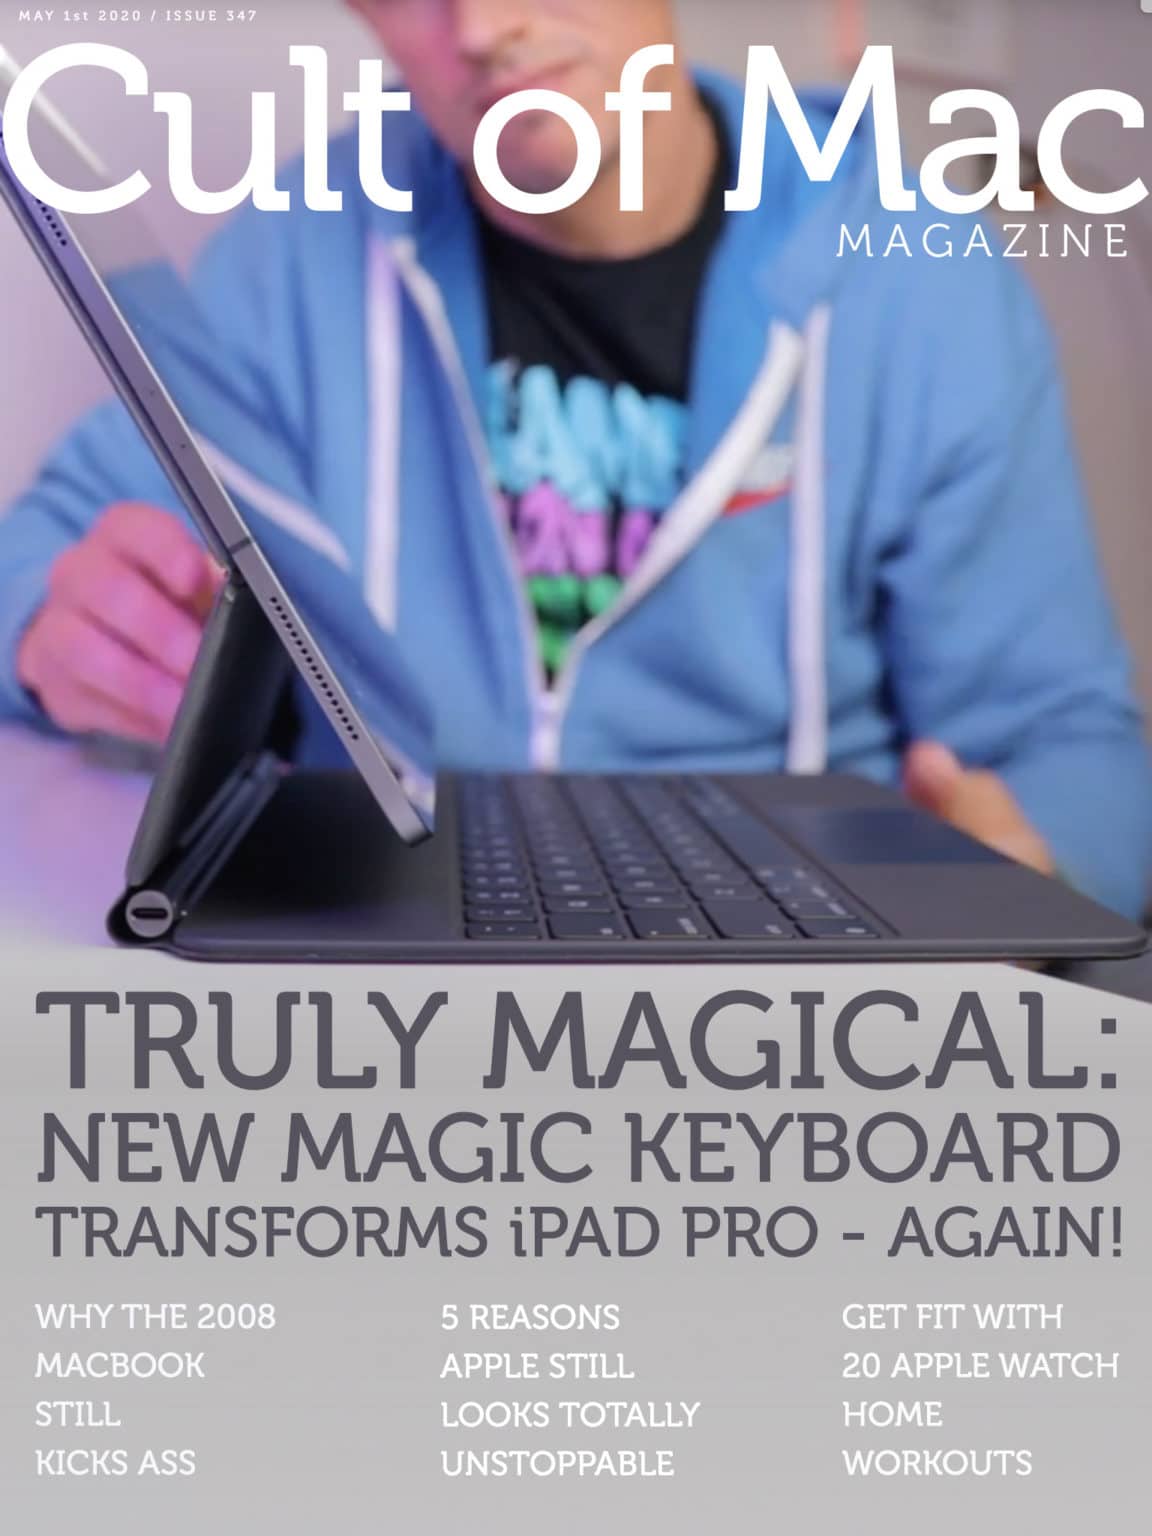 Magic Keyboard review: Truly magical iPad Pro accessory!